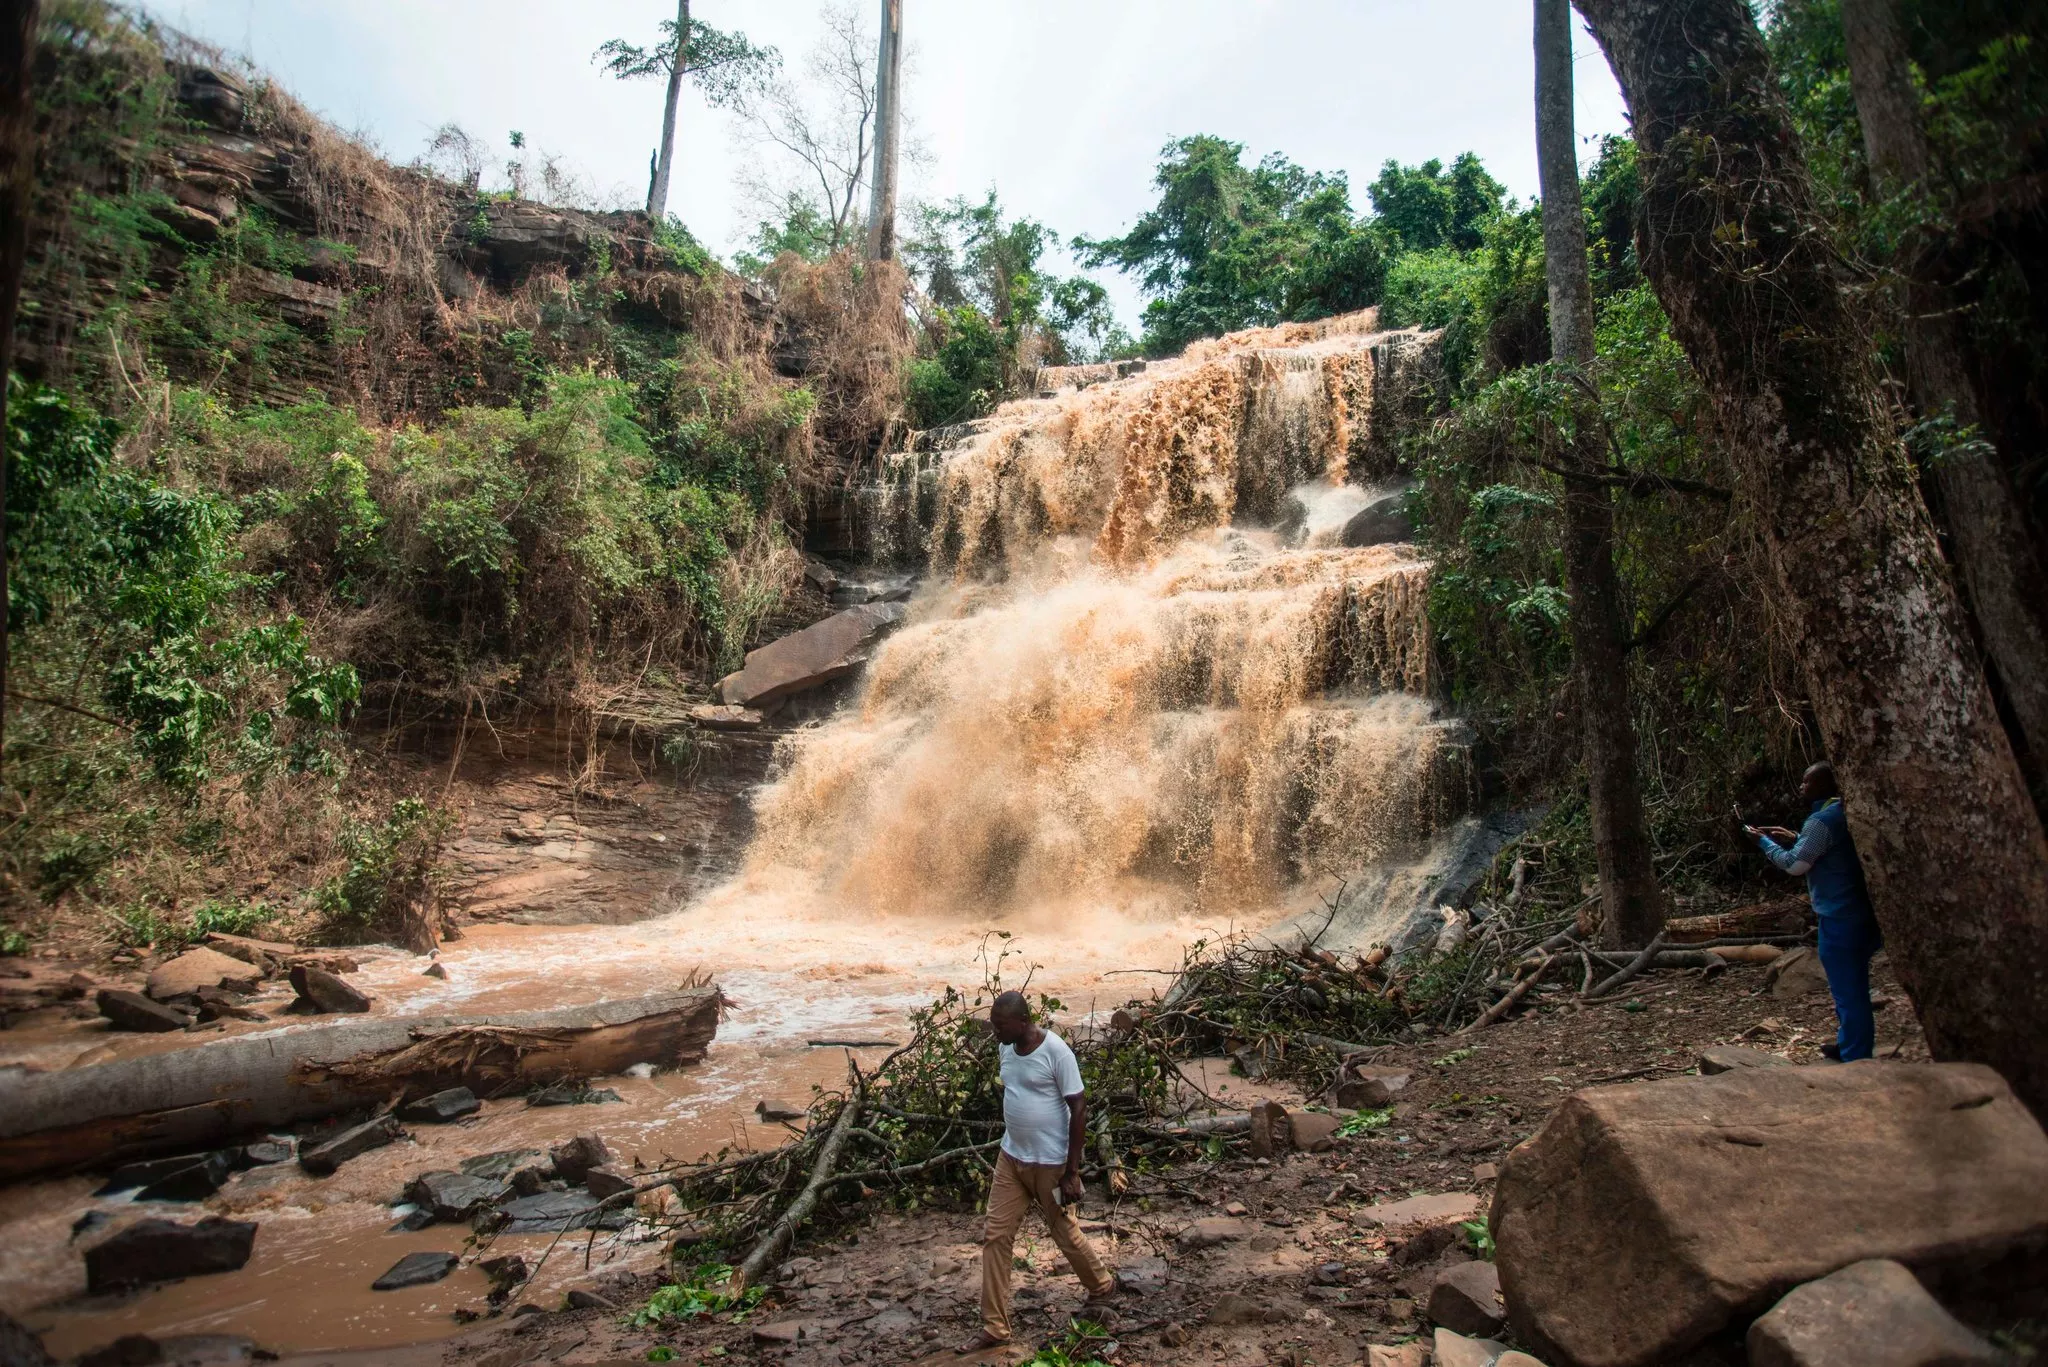 Kintampo Falls in Ghana, Africa | Waterfalls - Rated 3.4